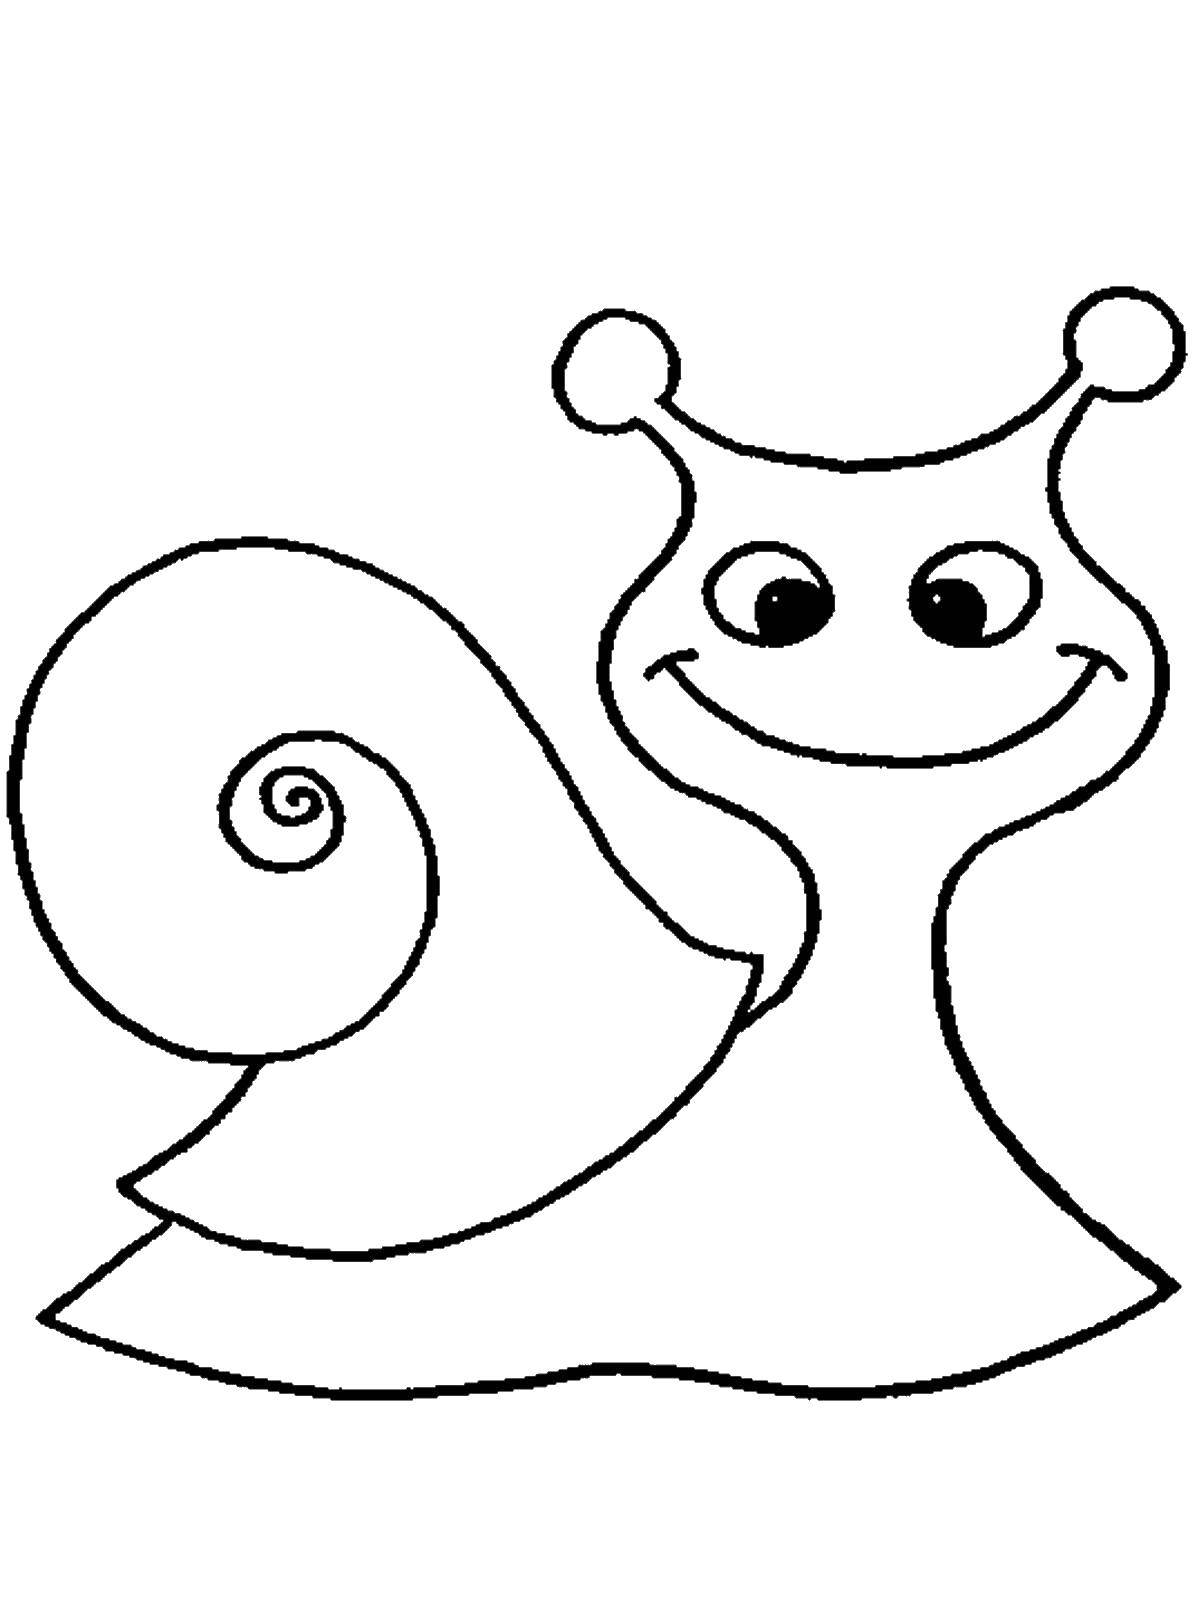 Coloring Funny snail. Category Coloring pages for kids. Tags:  snail.